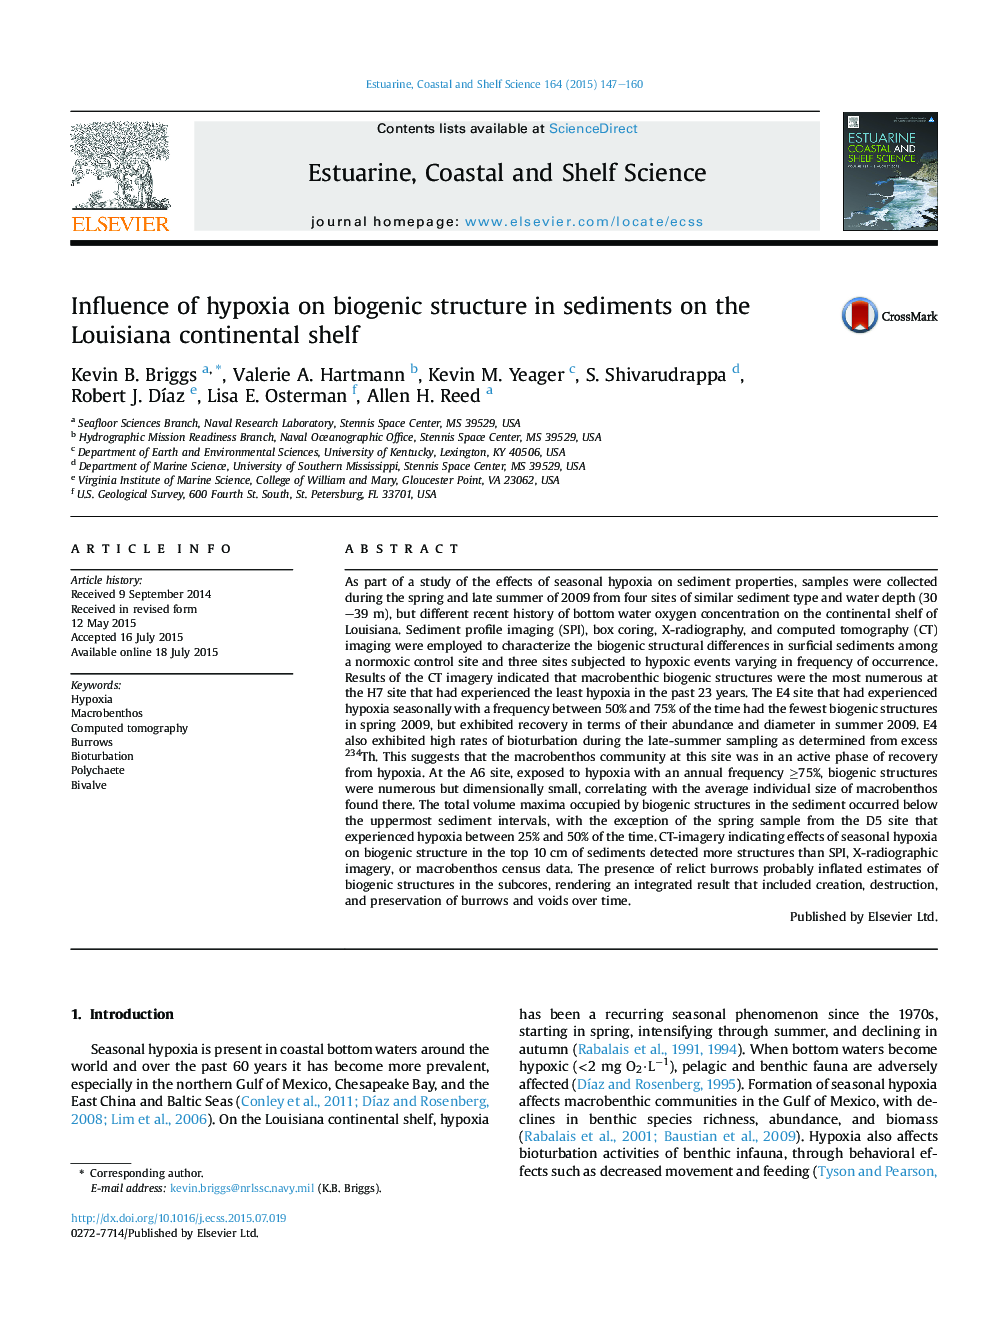 Influence of hypoxia on biogenic structure in sediments on the Louisiana continental shelf